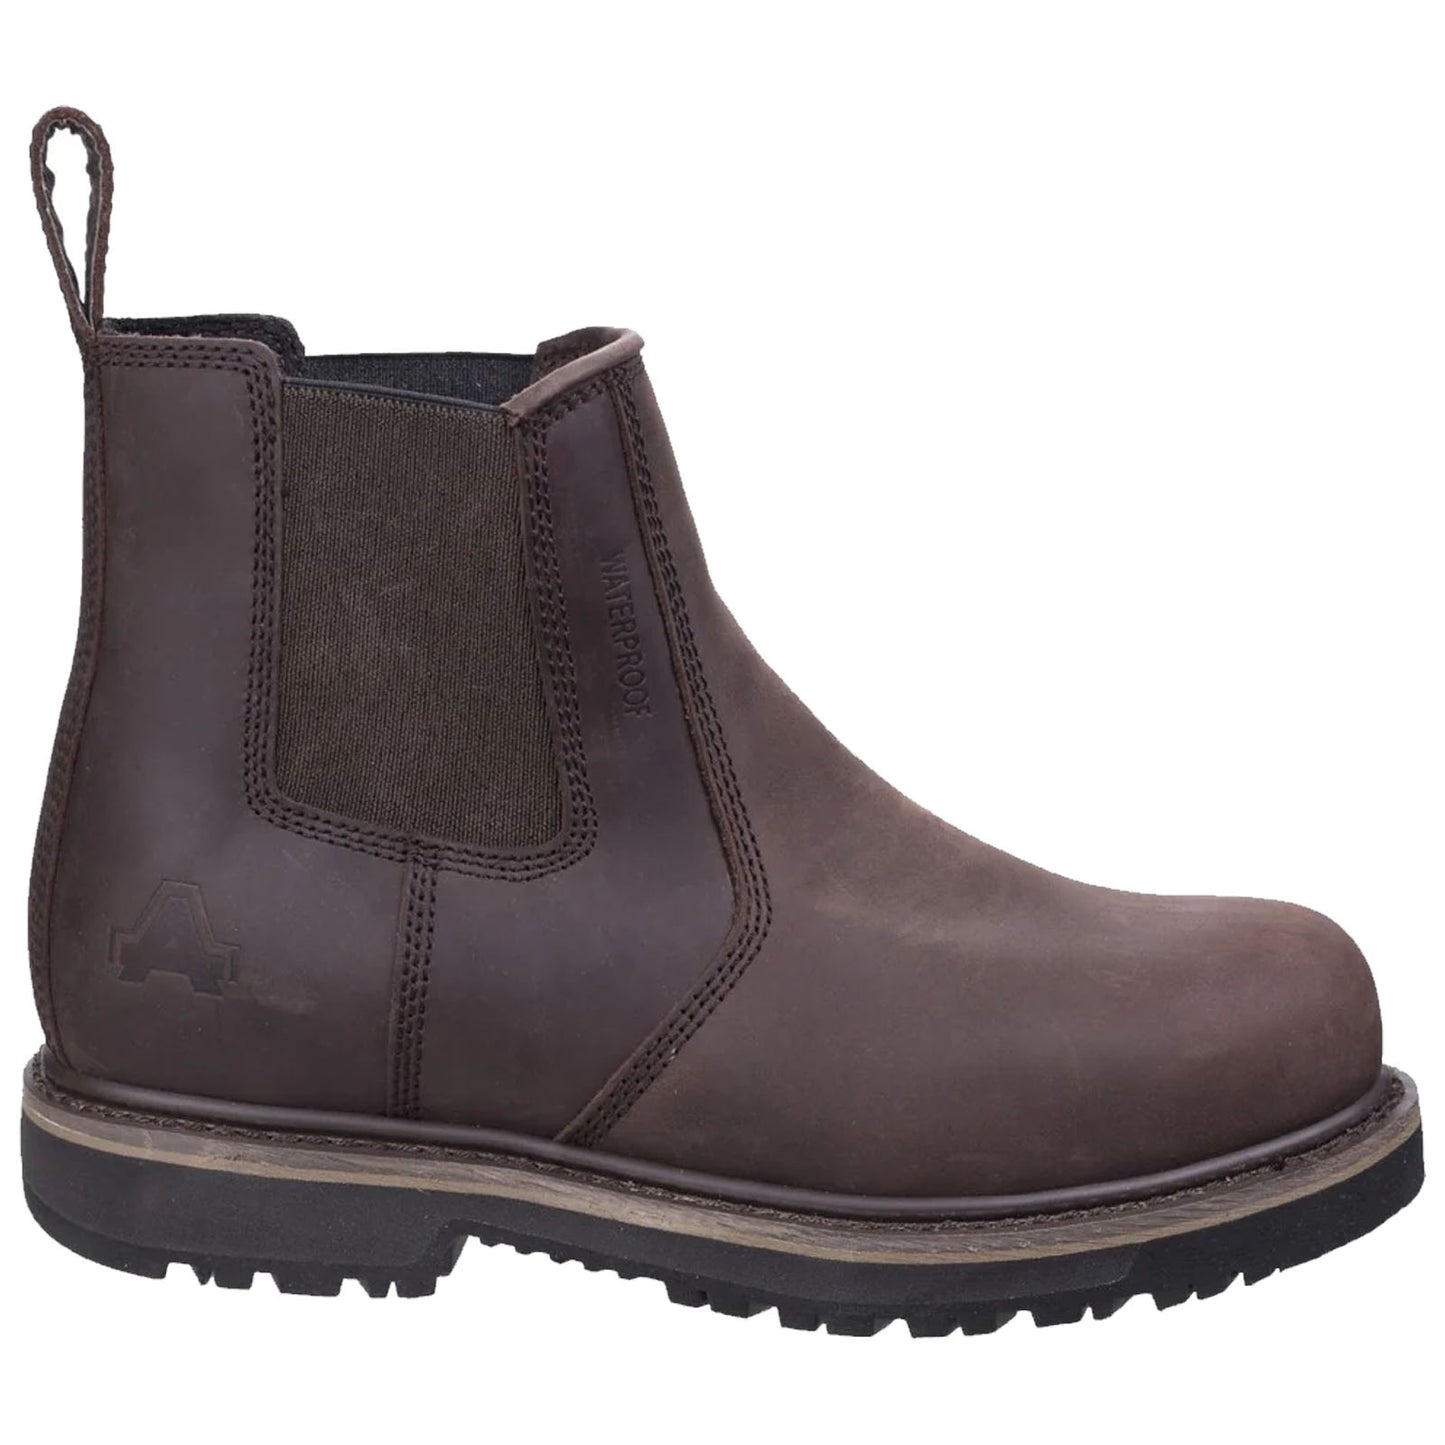 Amblers AS231 Skipton S3 Safety Dealer Boots